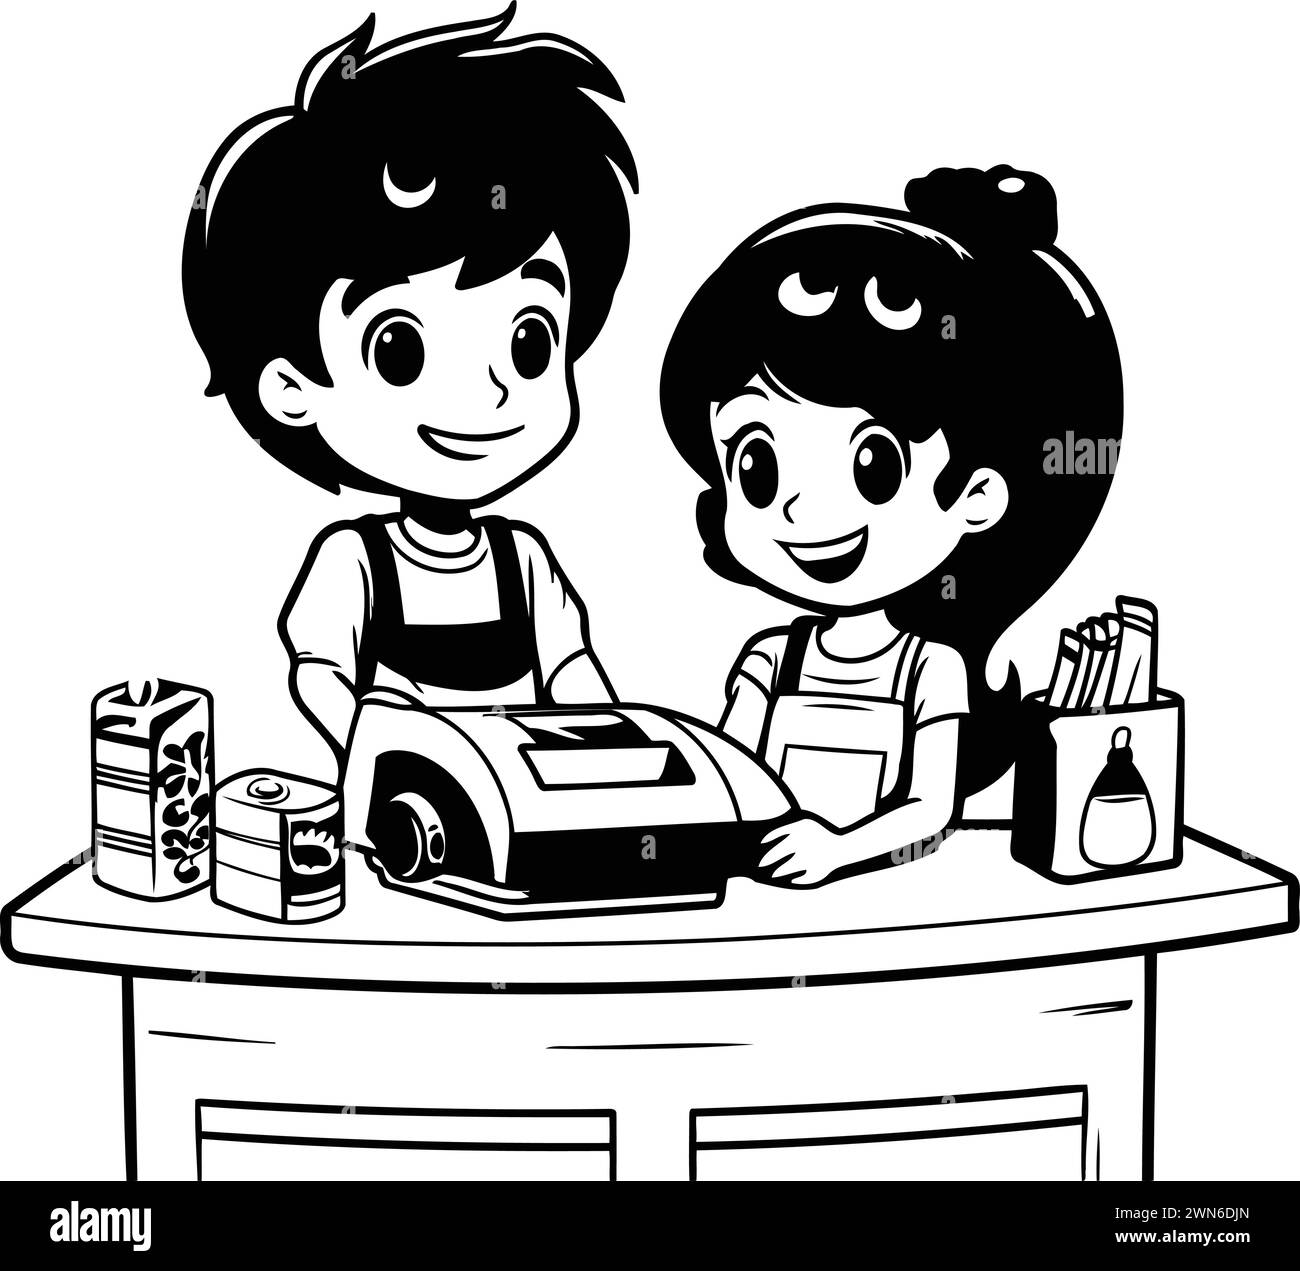 Cute boy and girl at the cash register. Black and white vector illustration. Stock Vector